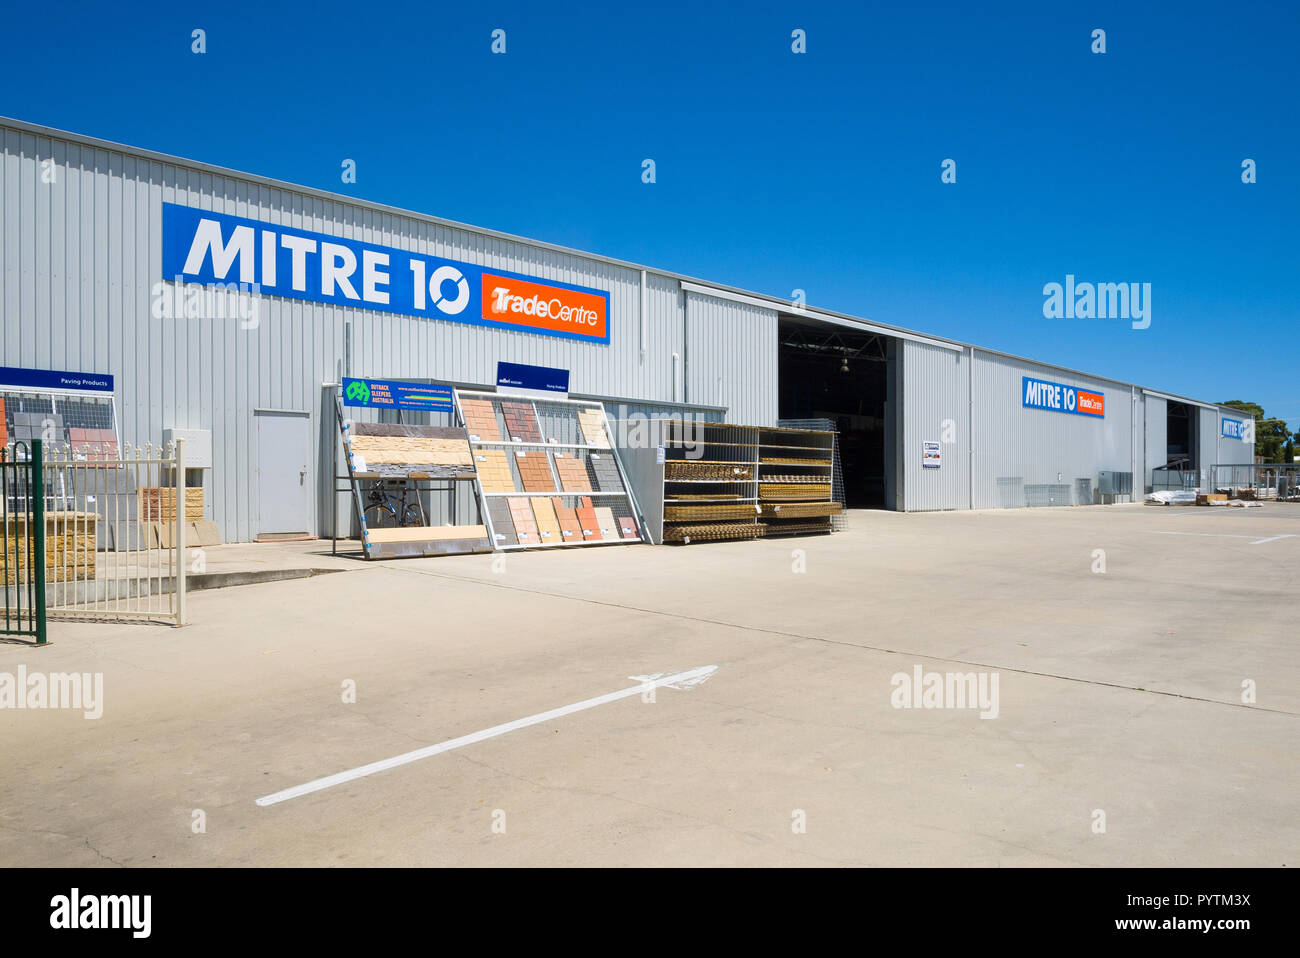 Exterior view of a large shed owned by the hardware store Linden Lea Mitre 10 in Kingscote on Kangaroo Island in South Australia, Australia. Stock Photo